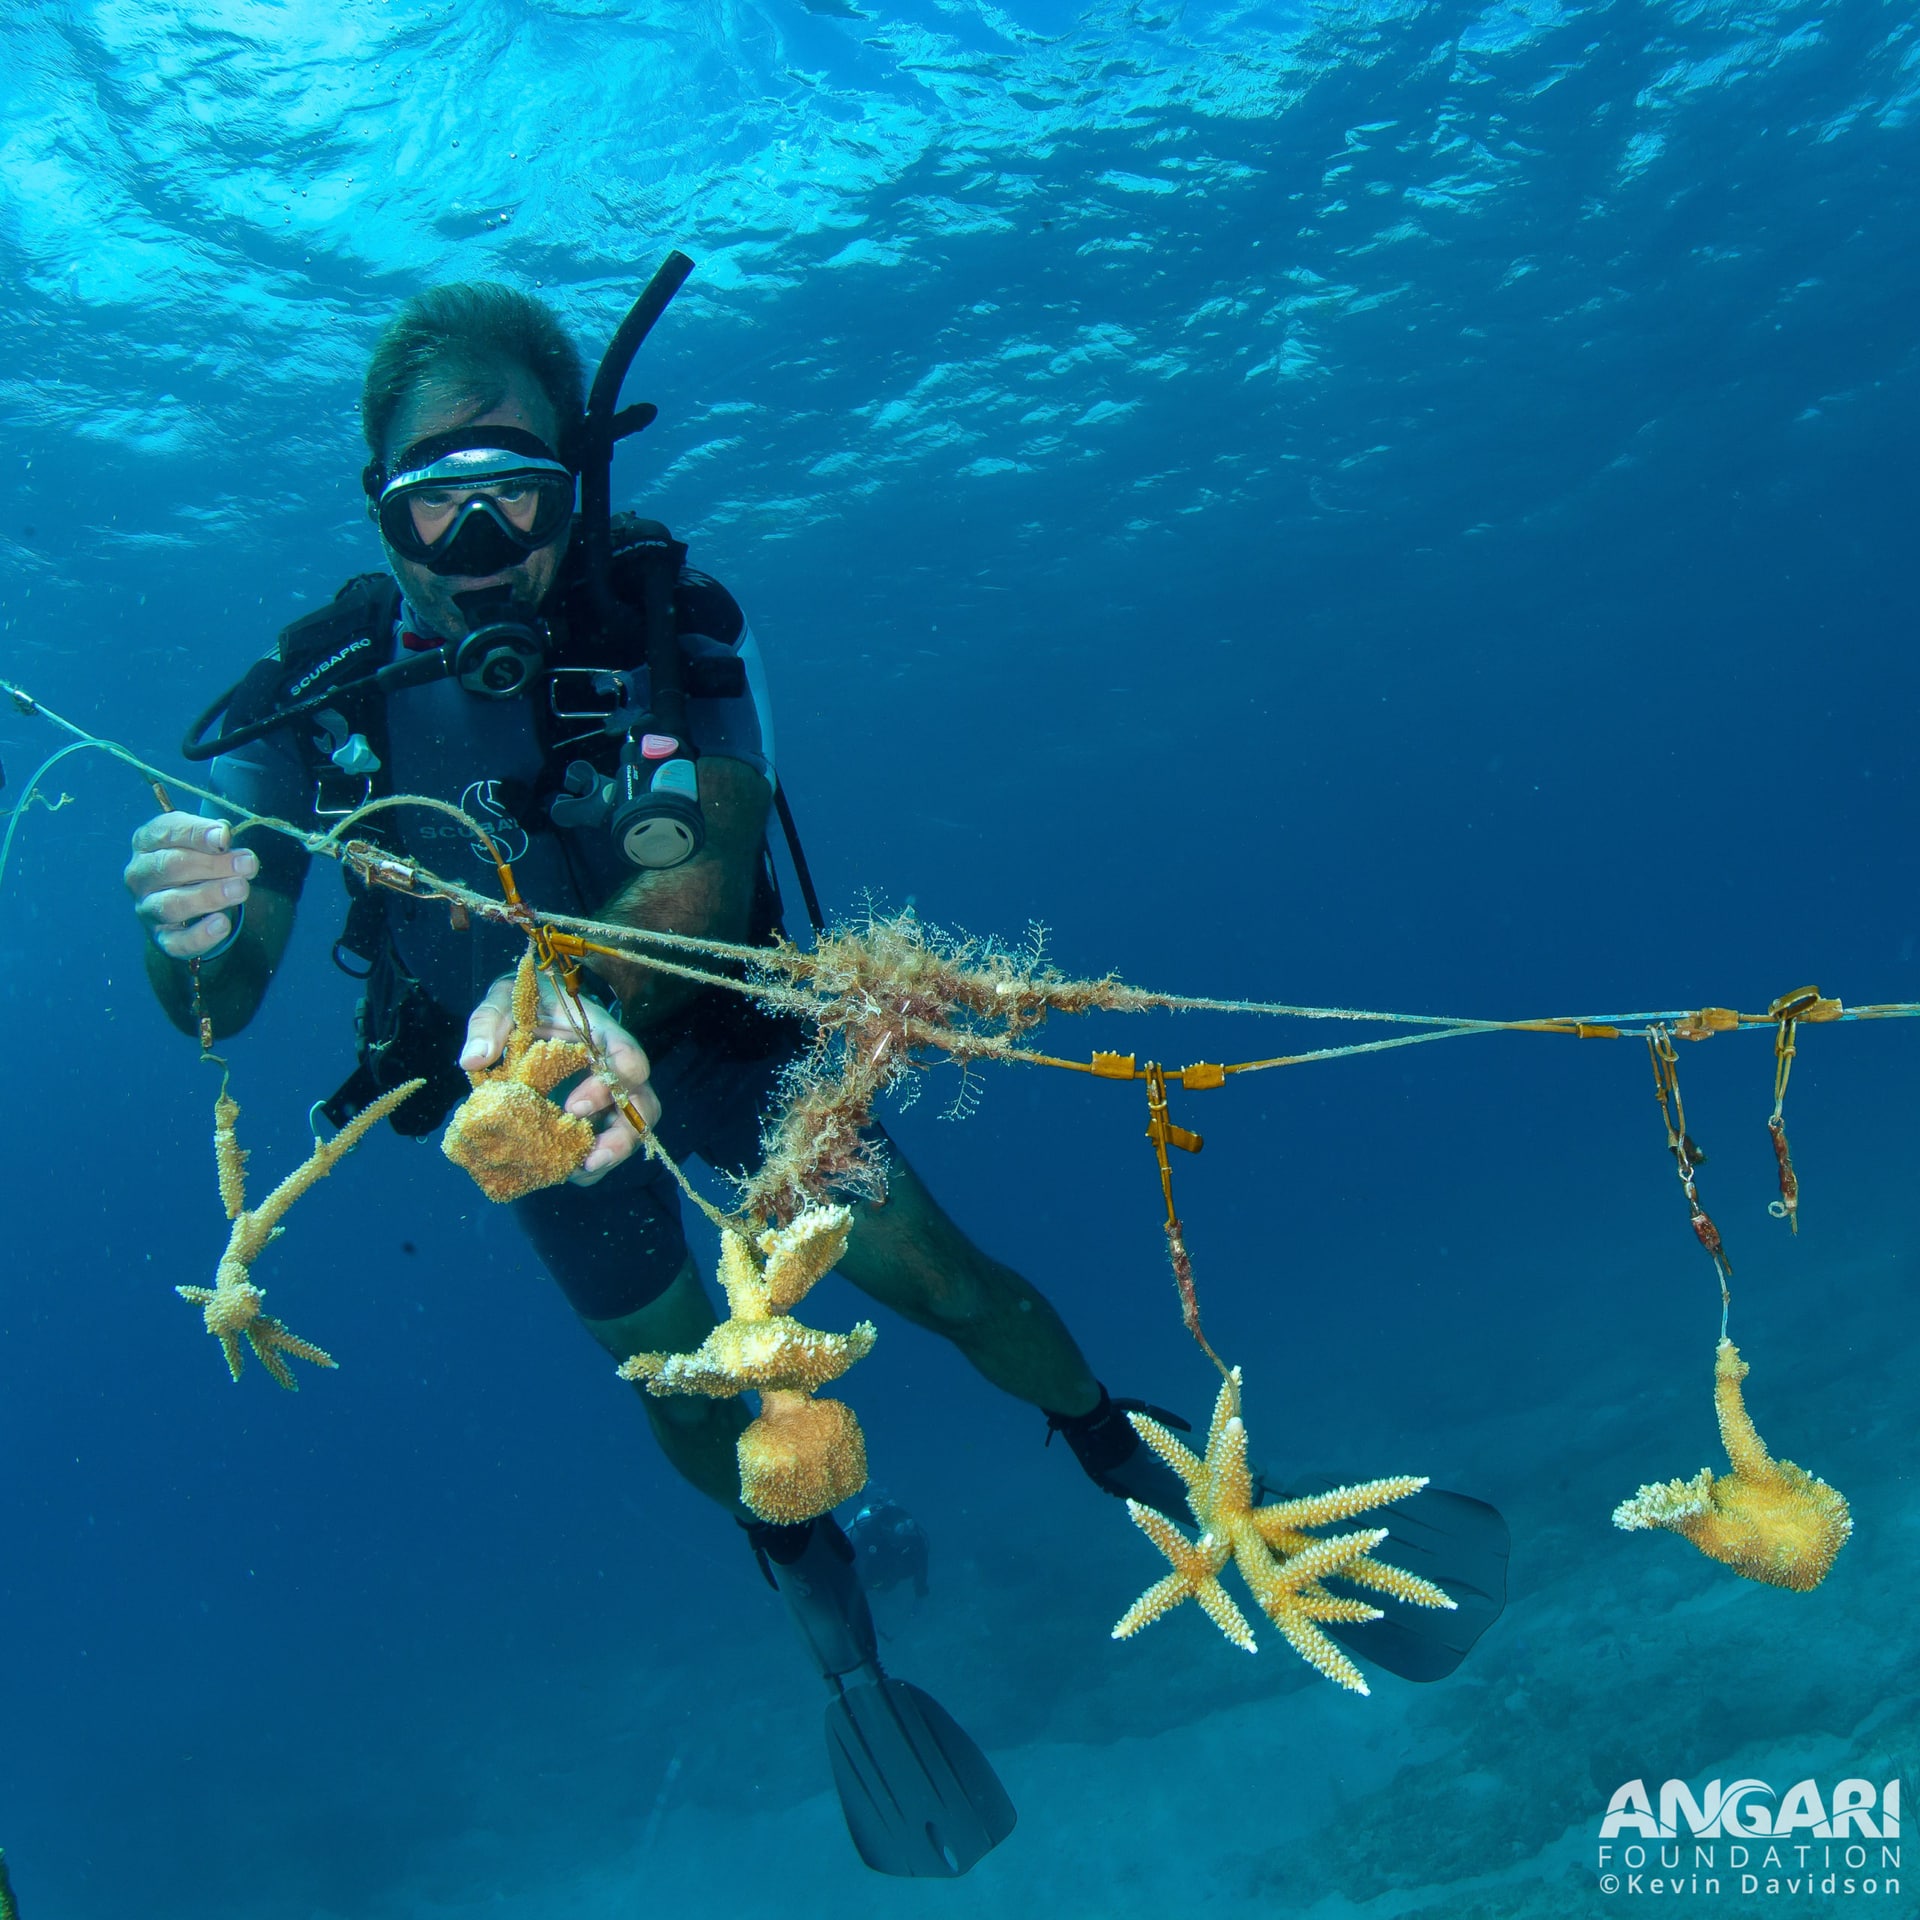 Fixing a Reef Rescue Network coral nursery that was damaged in recent a storm. PC: Kevin Davidson